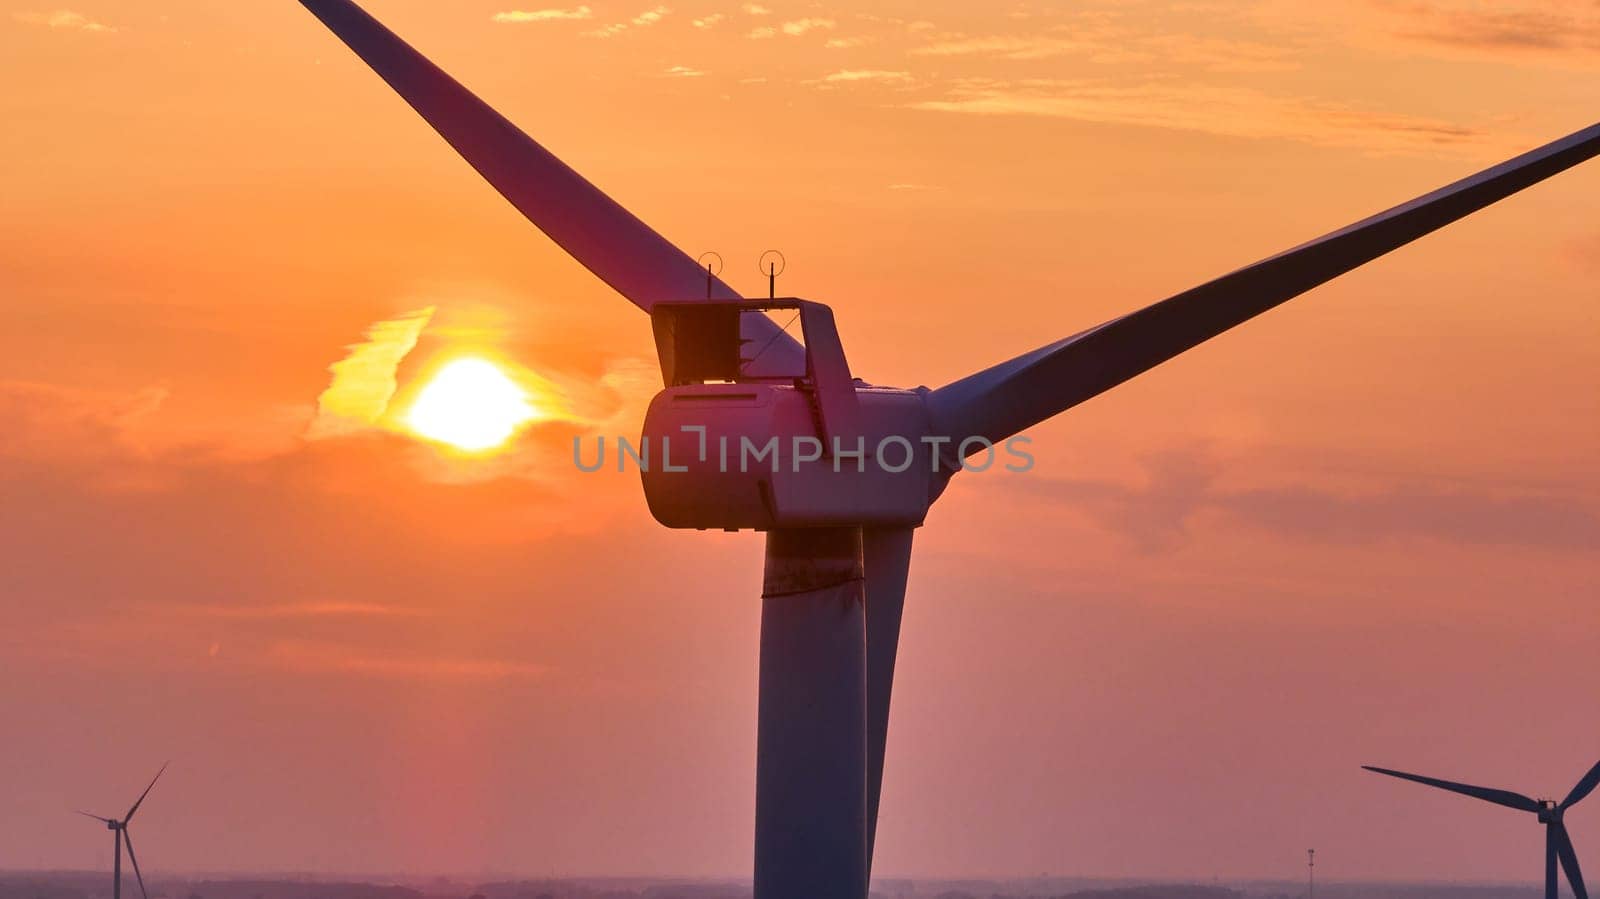 Golden sun at sunset behind close up of top of wind turbine with two distant turbines aerial by njproductions